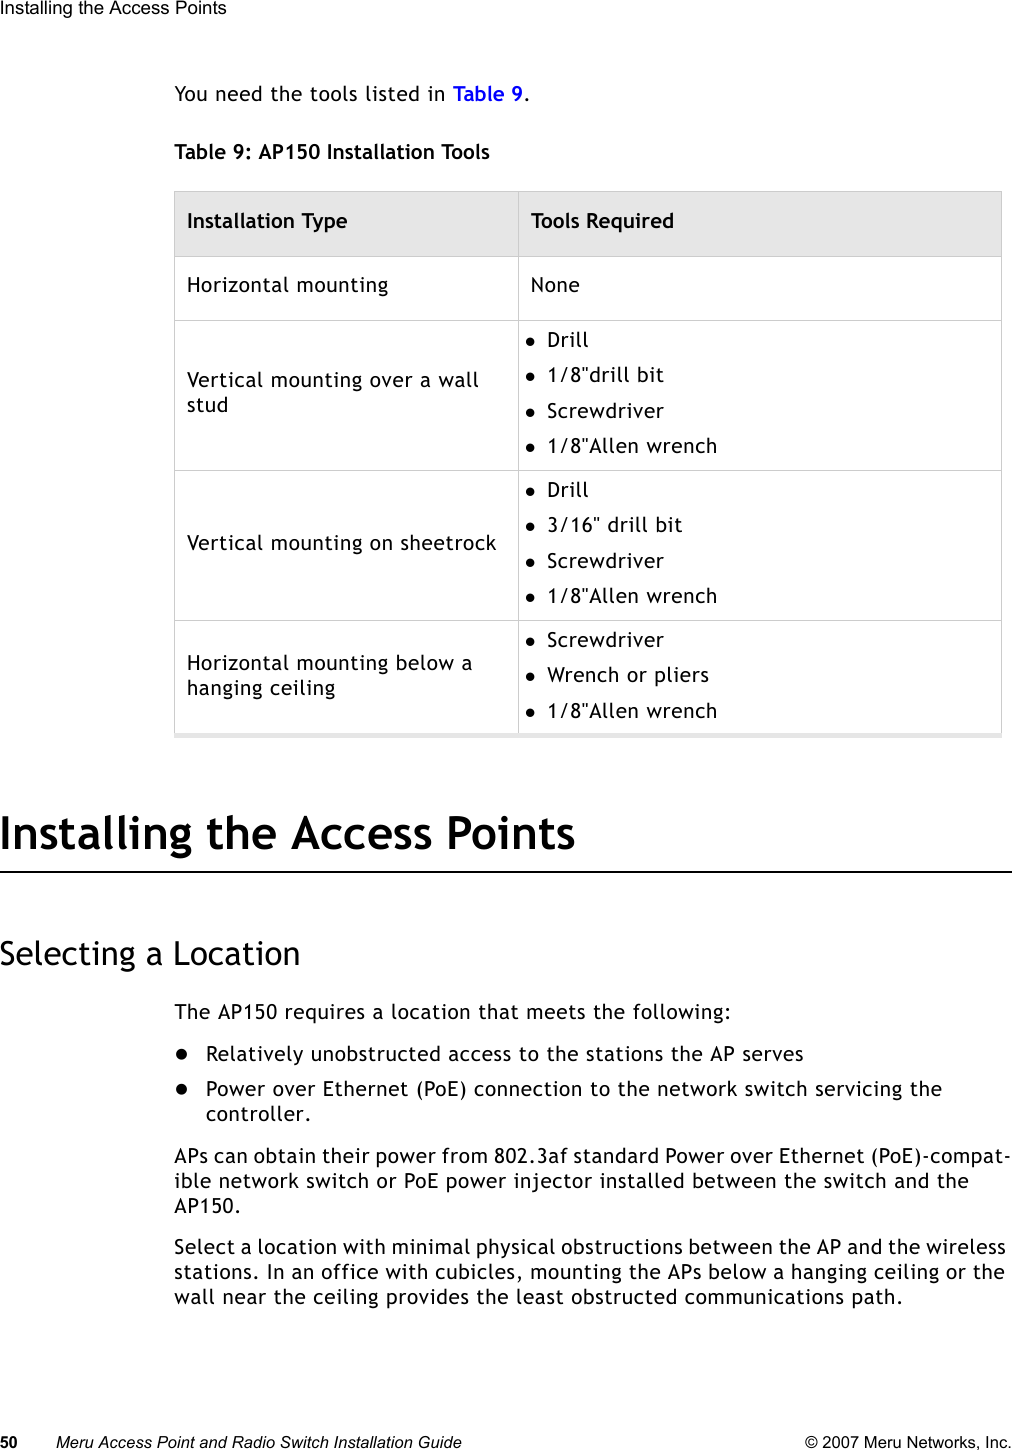 50 Meru Access Point and Radio Switch Installation Guide © 2007 Meru Networks, Inc.Installing the Access Points You need the tools listed in Tab le  9 .Table 9: AP150 Installation ToolsInstalling the Access PointsSelecting a LocationThe AP150 requires a location that meets the following:zRelatively unobstructed access to the stations the AP serveszPower over Ethernet (PoE) connection to the network switch servicing the controller.APs can obtain their power from 802.3af standard Power over Ethernet (PoE)-compat-ible network switch or PoE power injector installed between the switch and the AP150. Select a location with minimal physical obstructions between the AP and the wireless stations. In an office with cubicles, mounting the APs below a hanging ceiling or the wall near the ceiling provides the least obstructed communications path.Installation Type Tools RequiredHorizontal mounting NoneVertical mounting over a wall studzDrill z1/8&quot;drill bitzScrewdriverz1/8&quot;Allen wrenchVertical mounting on sheetrockzDrillz3/16&quot; drill bitzScrewdriverz1/8&quot;Allen wrenchHorizontal mounting below a hanging ceilingzScrewdriverzWrench or pliersz1/8&quot;Allen wrench